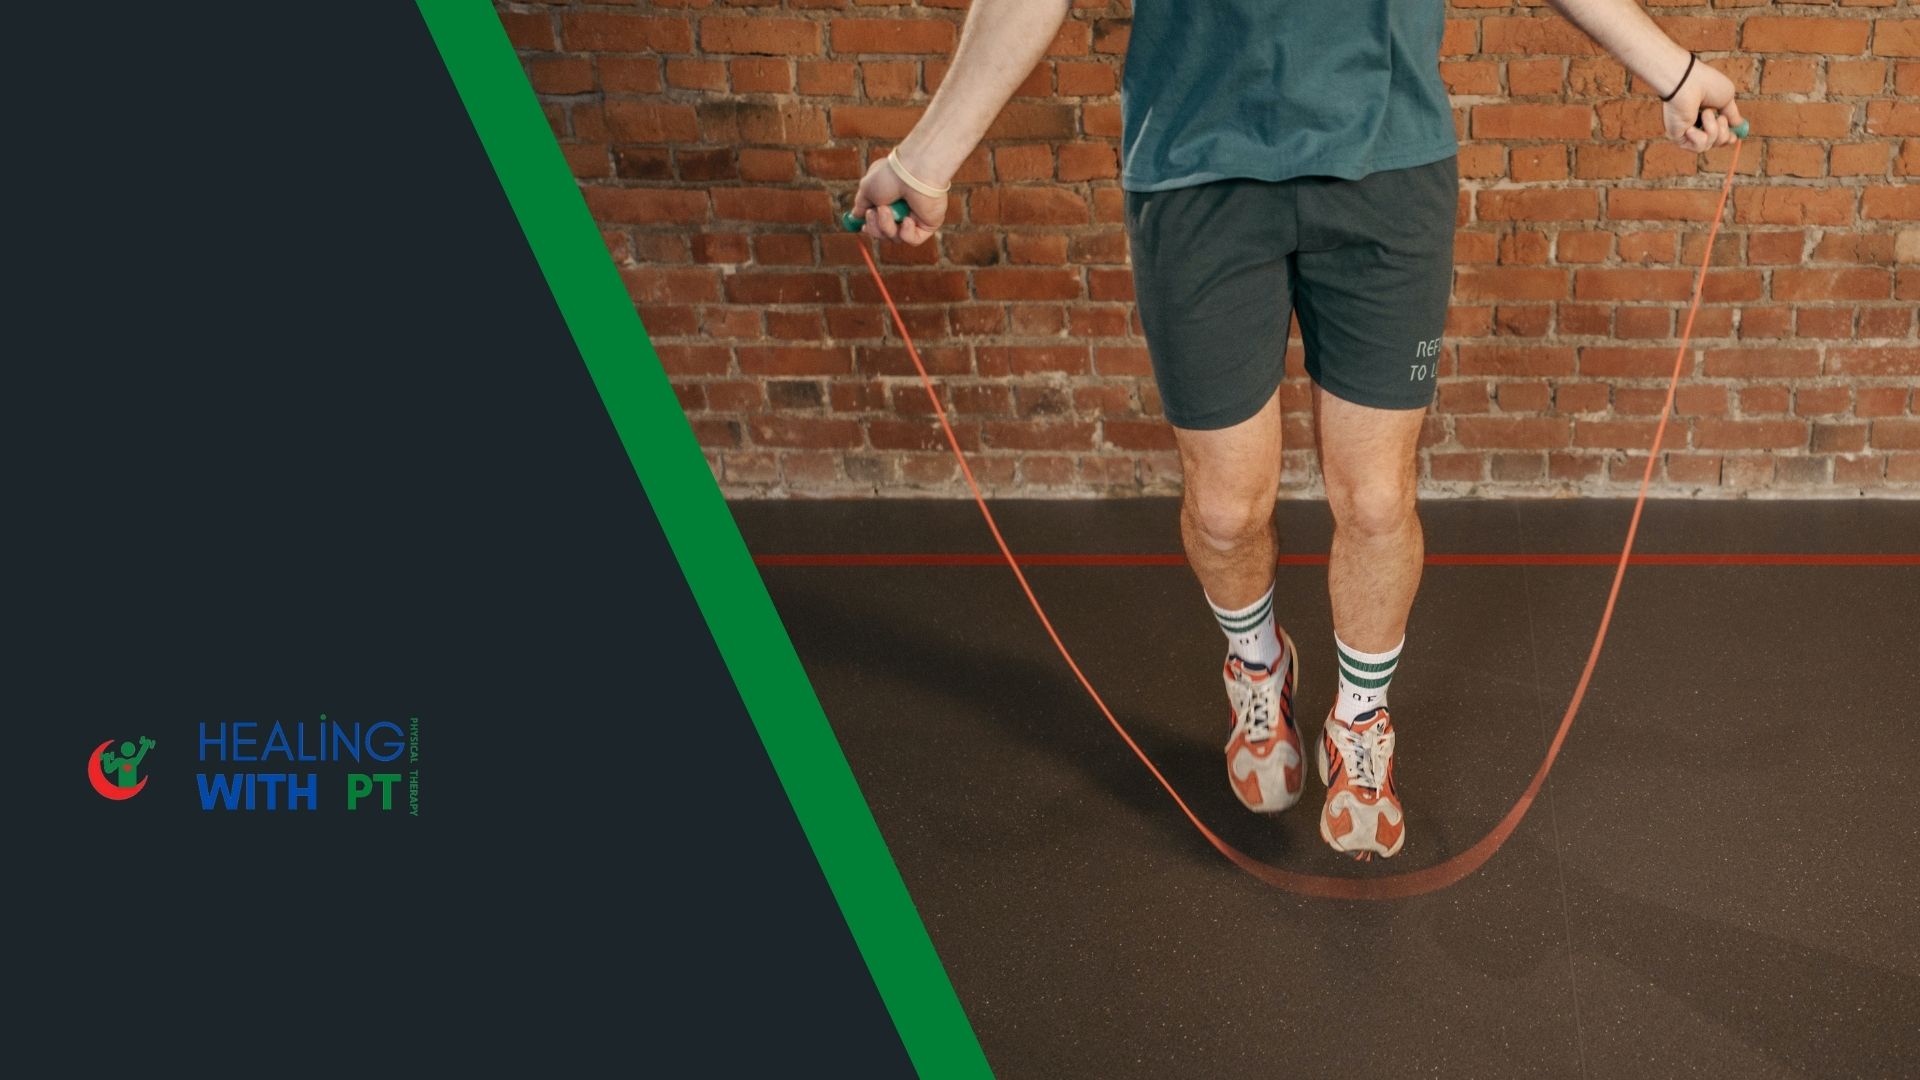 Is jump rope better than trampolining for weight loss?